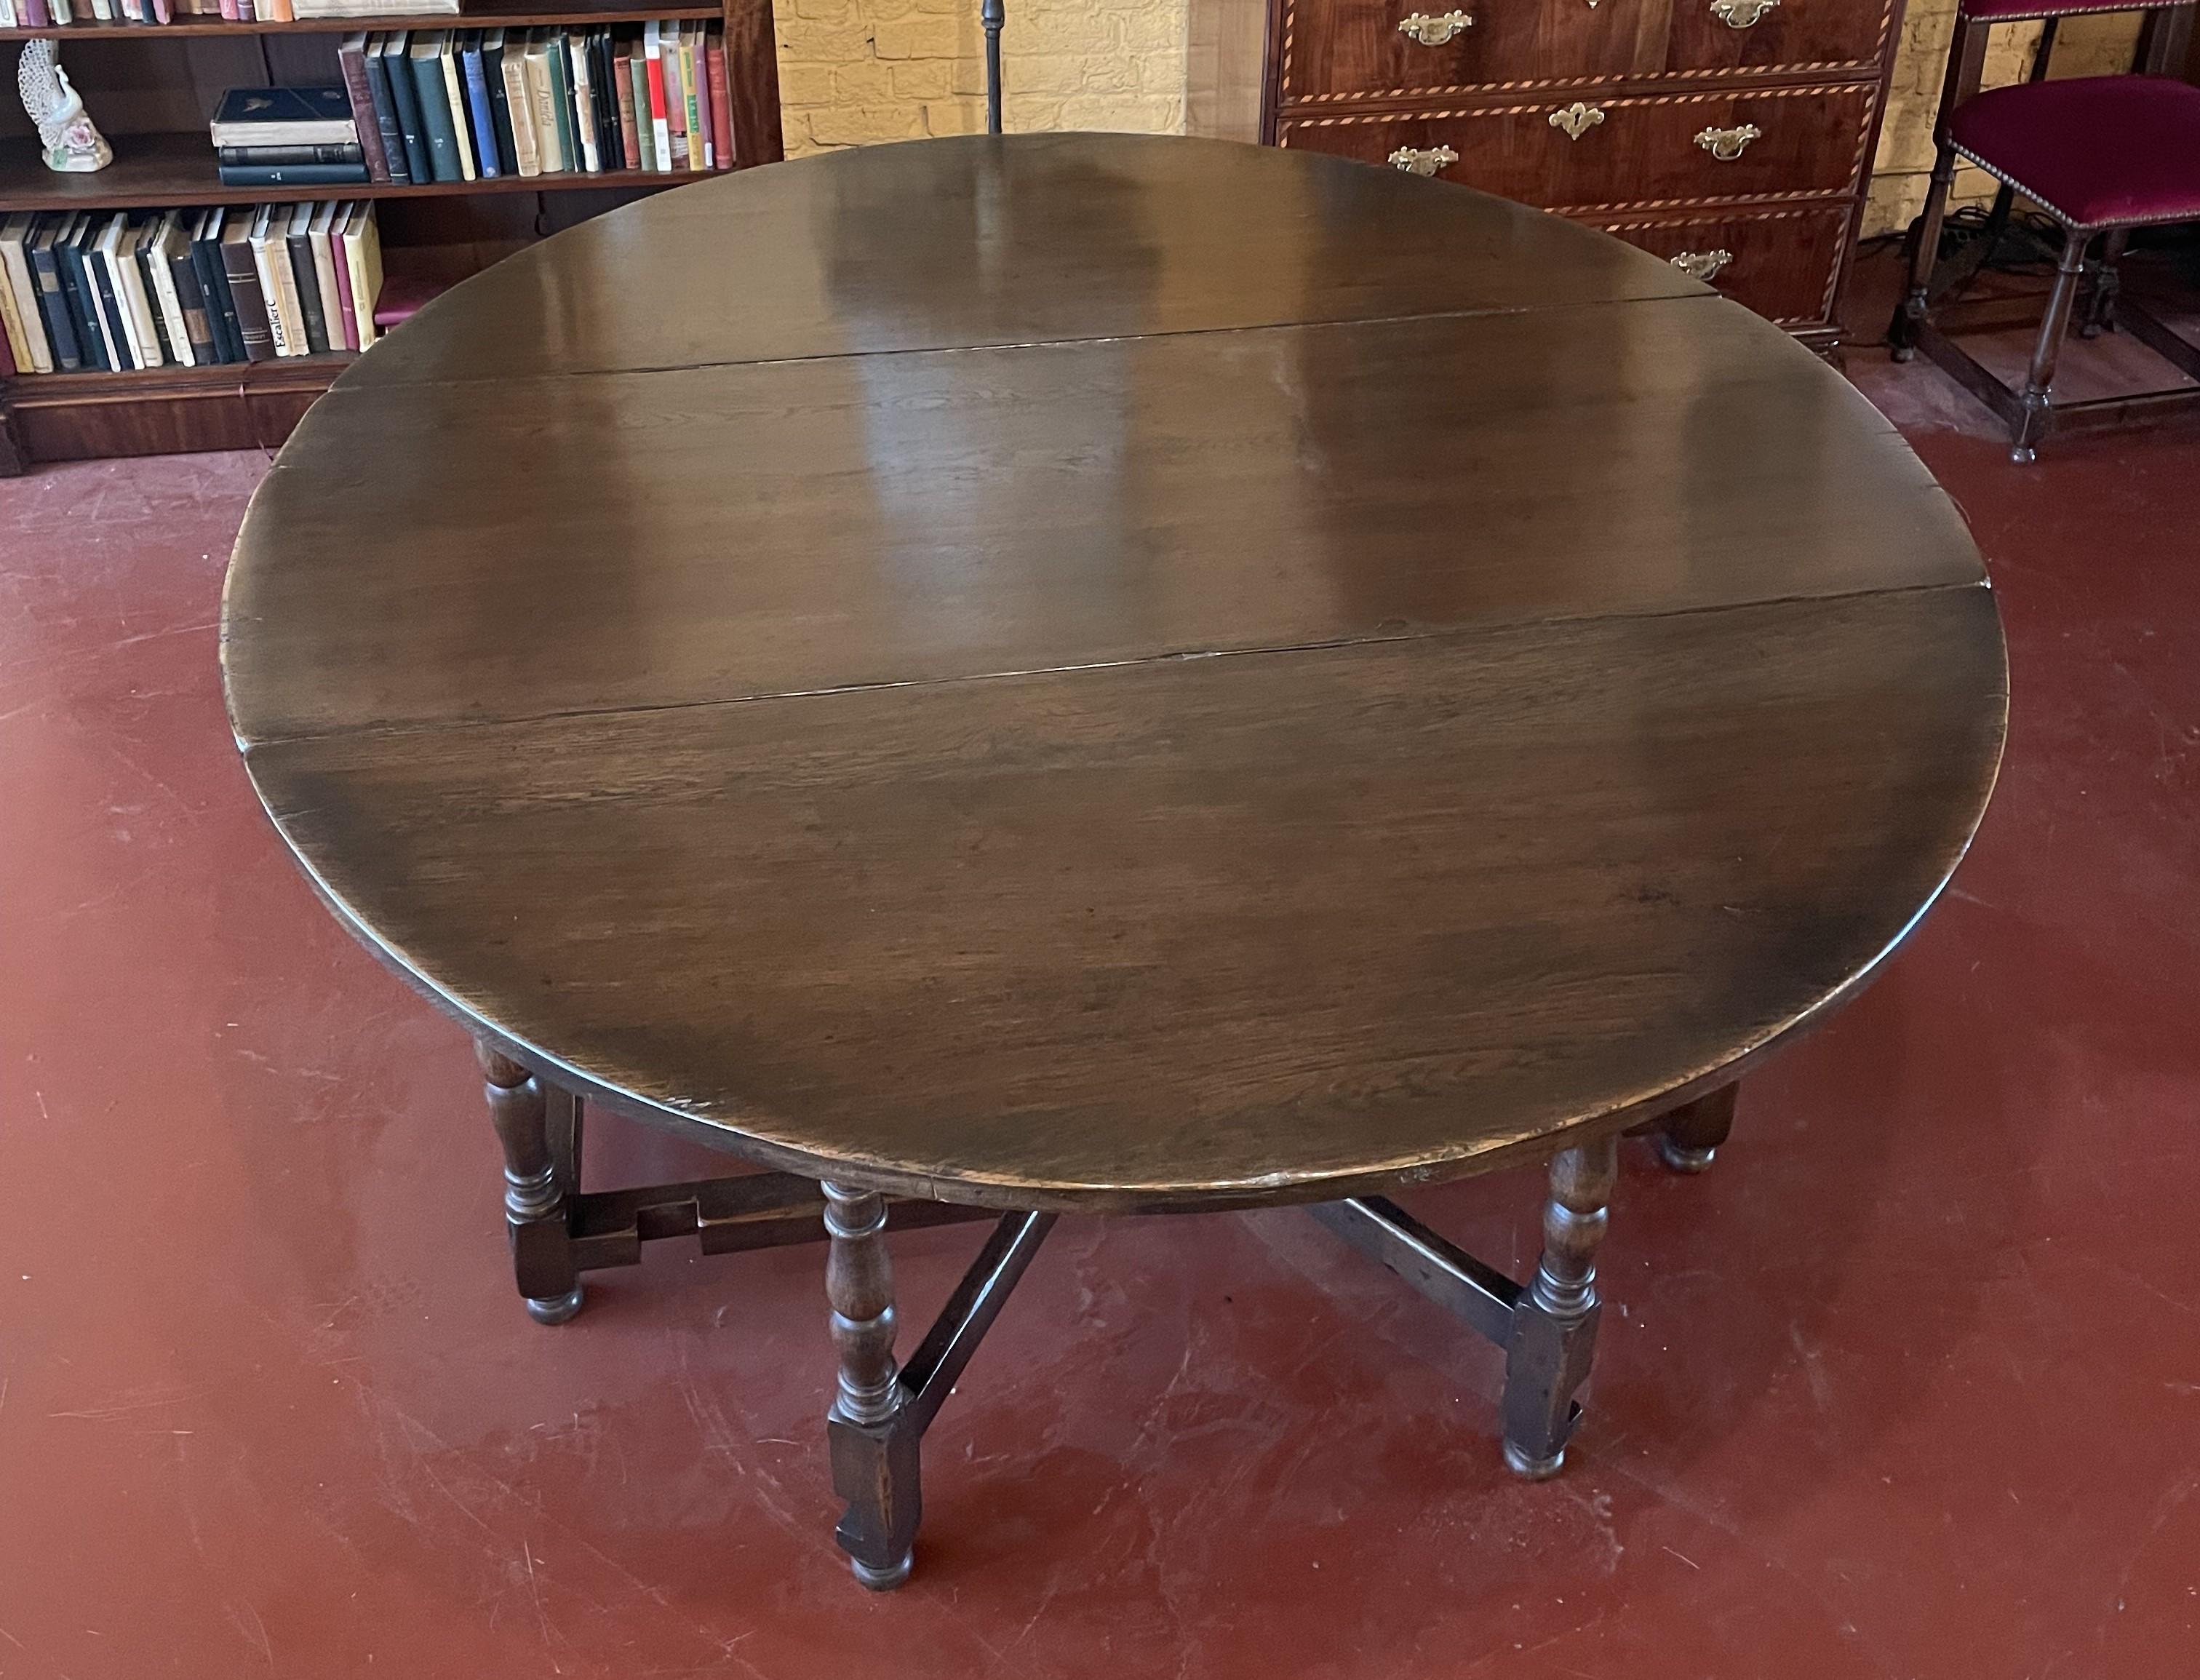 lovely oak table called Gateleg

Very beautiful table which has a very beautiful turned base

Beautiful top with a thickness of 3cm

the table can be used as a dining room table, as a closed console or as a half-moon table

very beautiful patina and